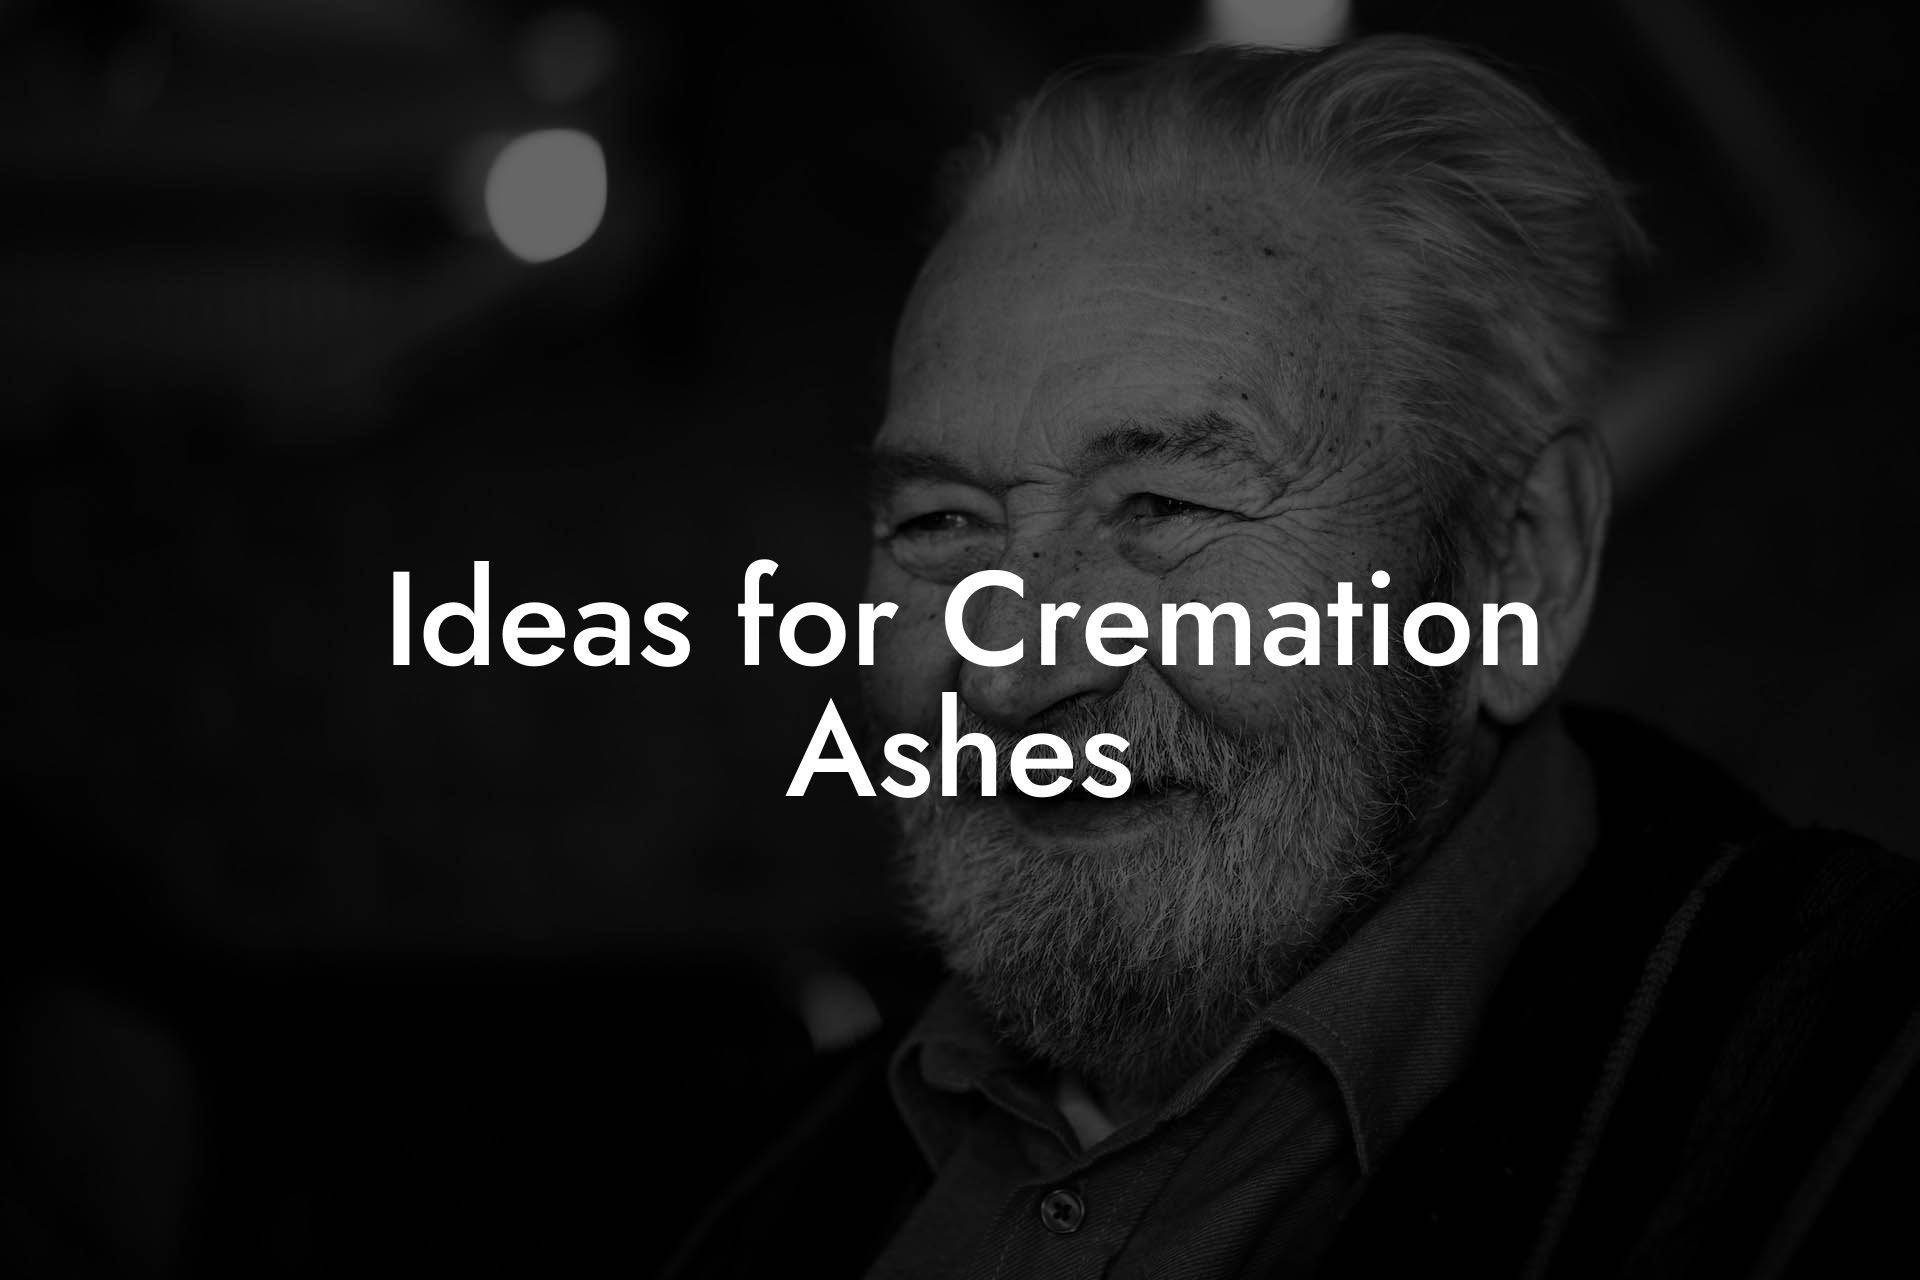 Ideas for Cremation Ashes